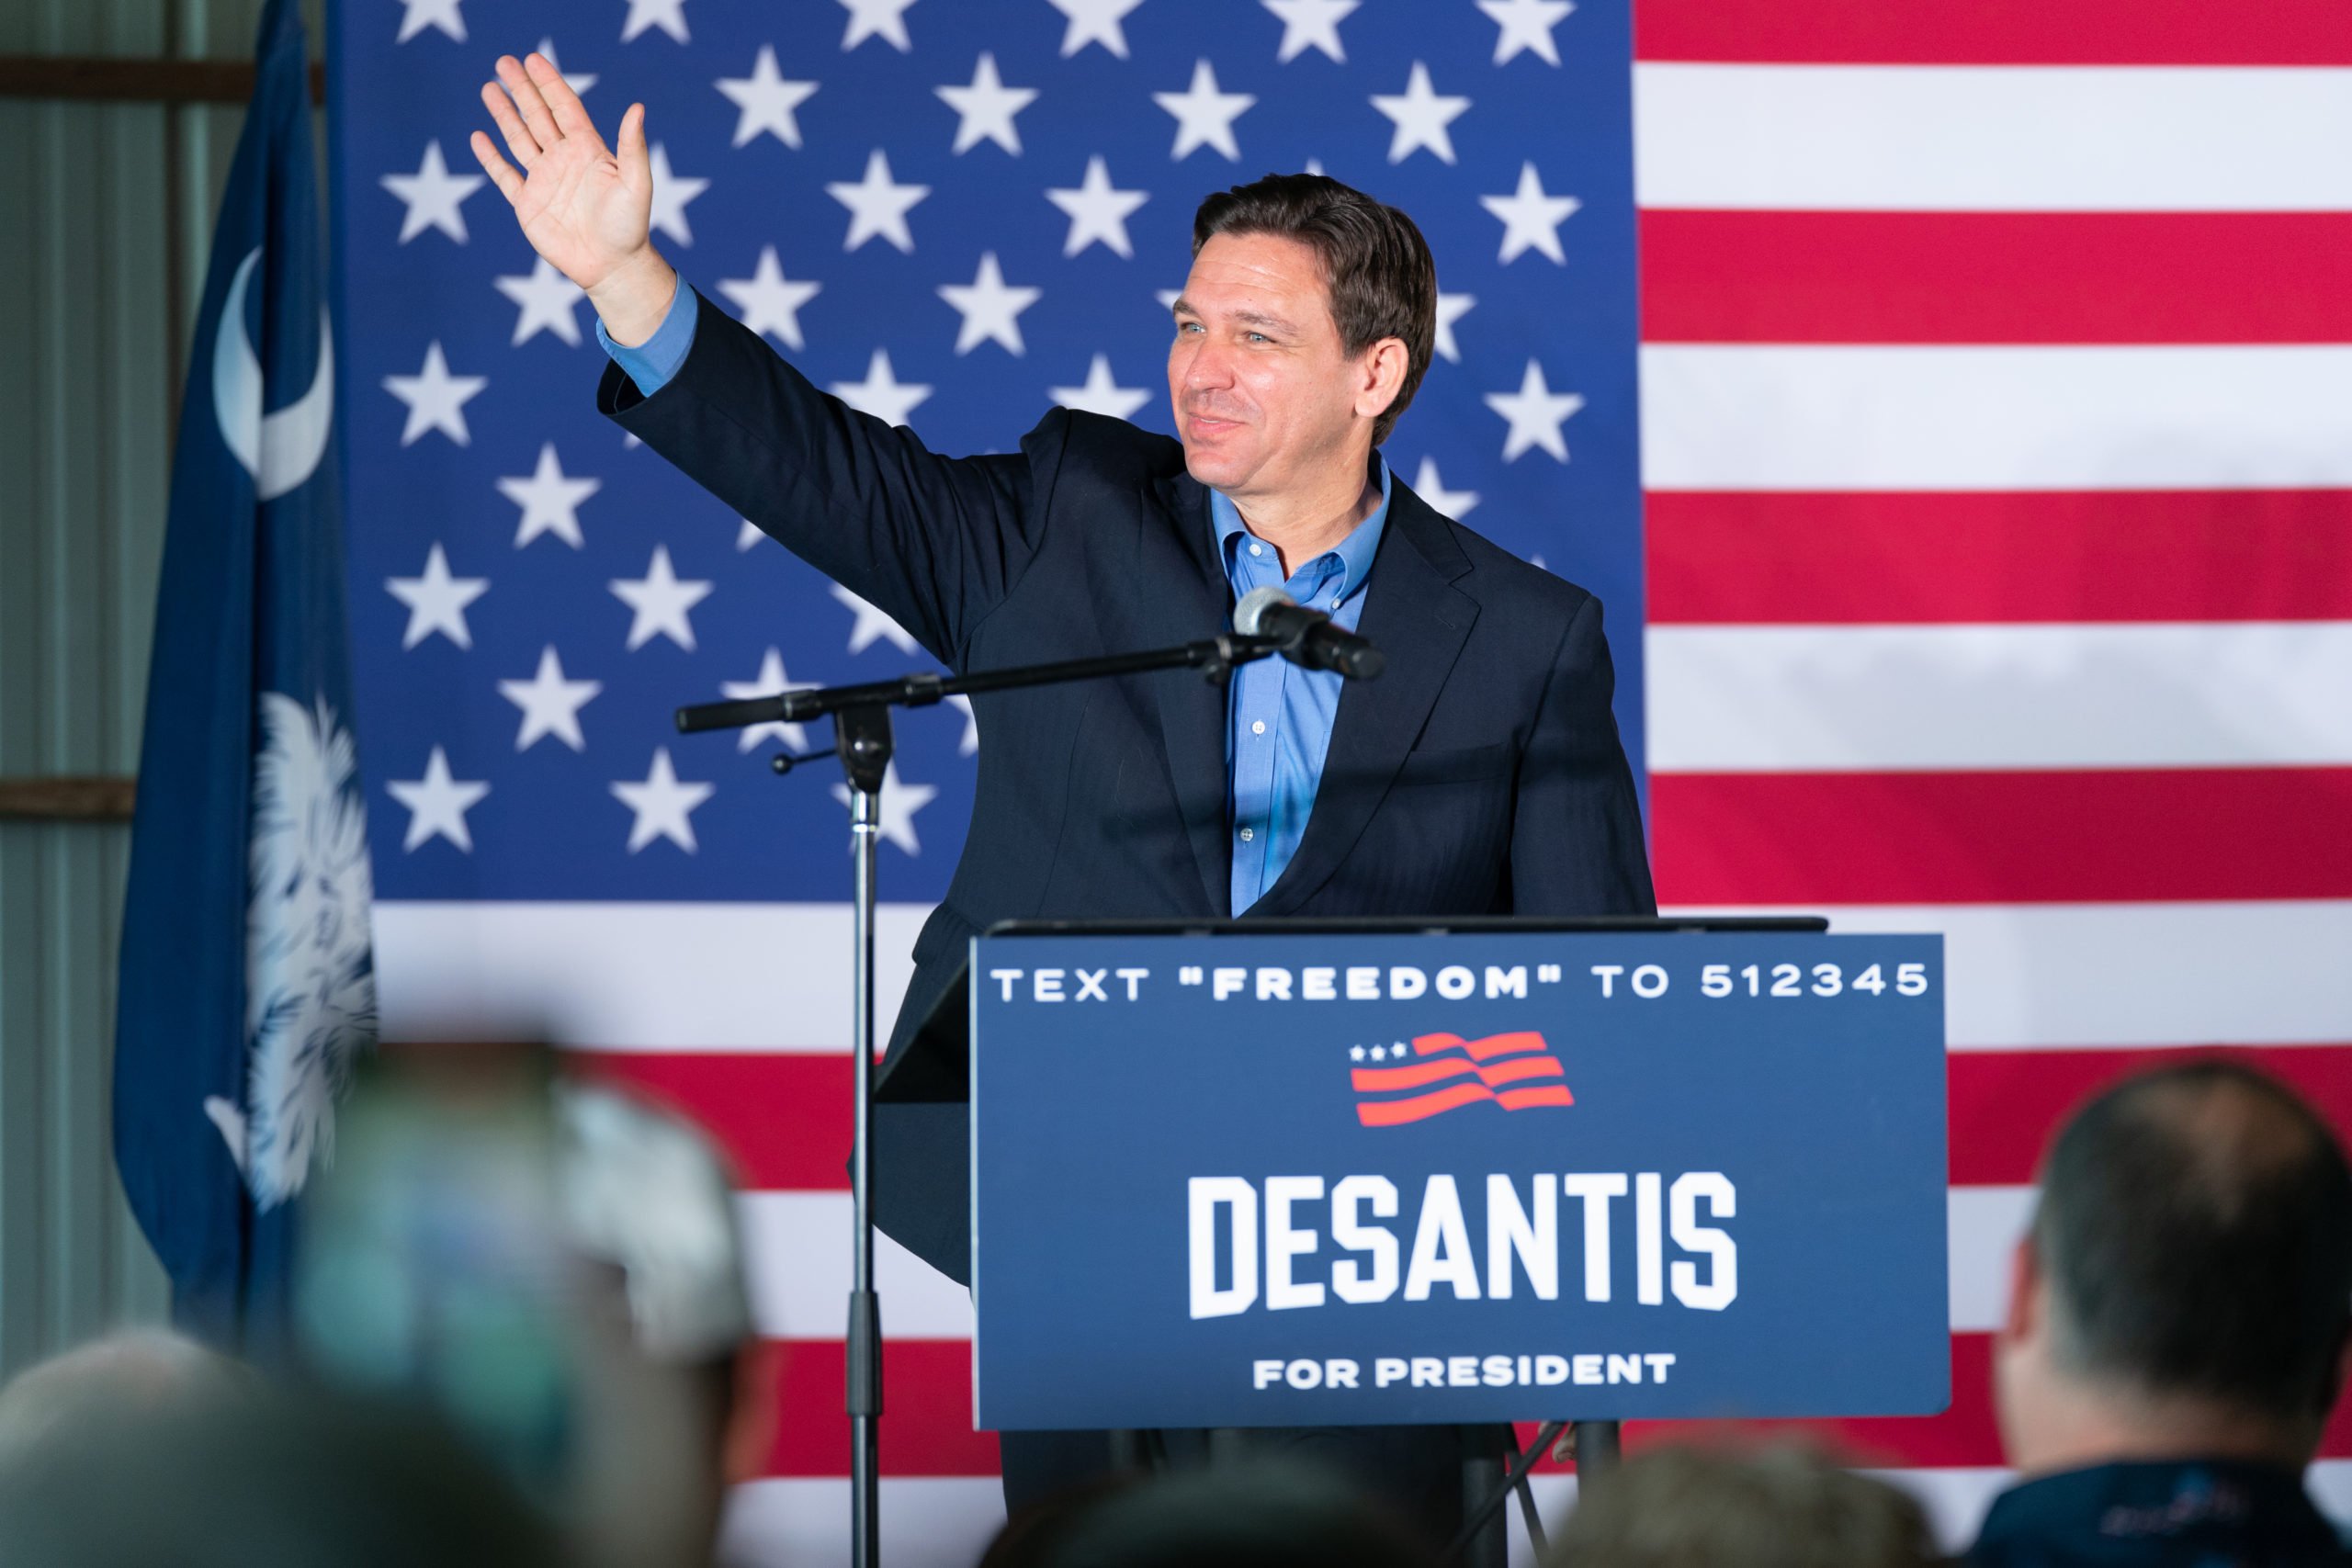 GILBERT, SOUTH CAROLINA - JUNE 2: Presidential candidate and Florida Governor Ron DeSantis waves to a crowd at a campaign event on June 2, 2023 in Gilbert, South Carolina. (Photo by Sean Rayford/Getty Images)